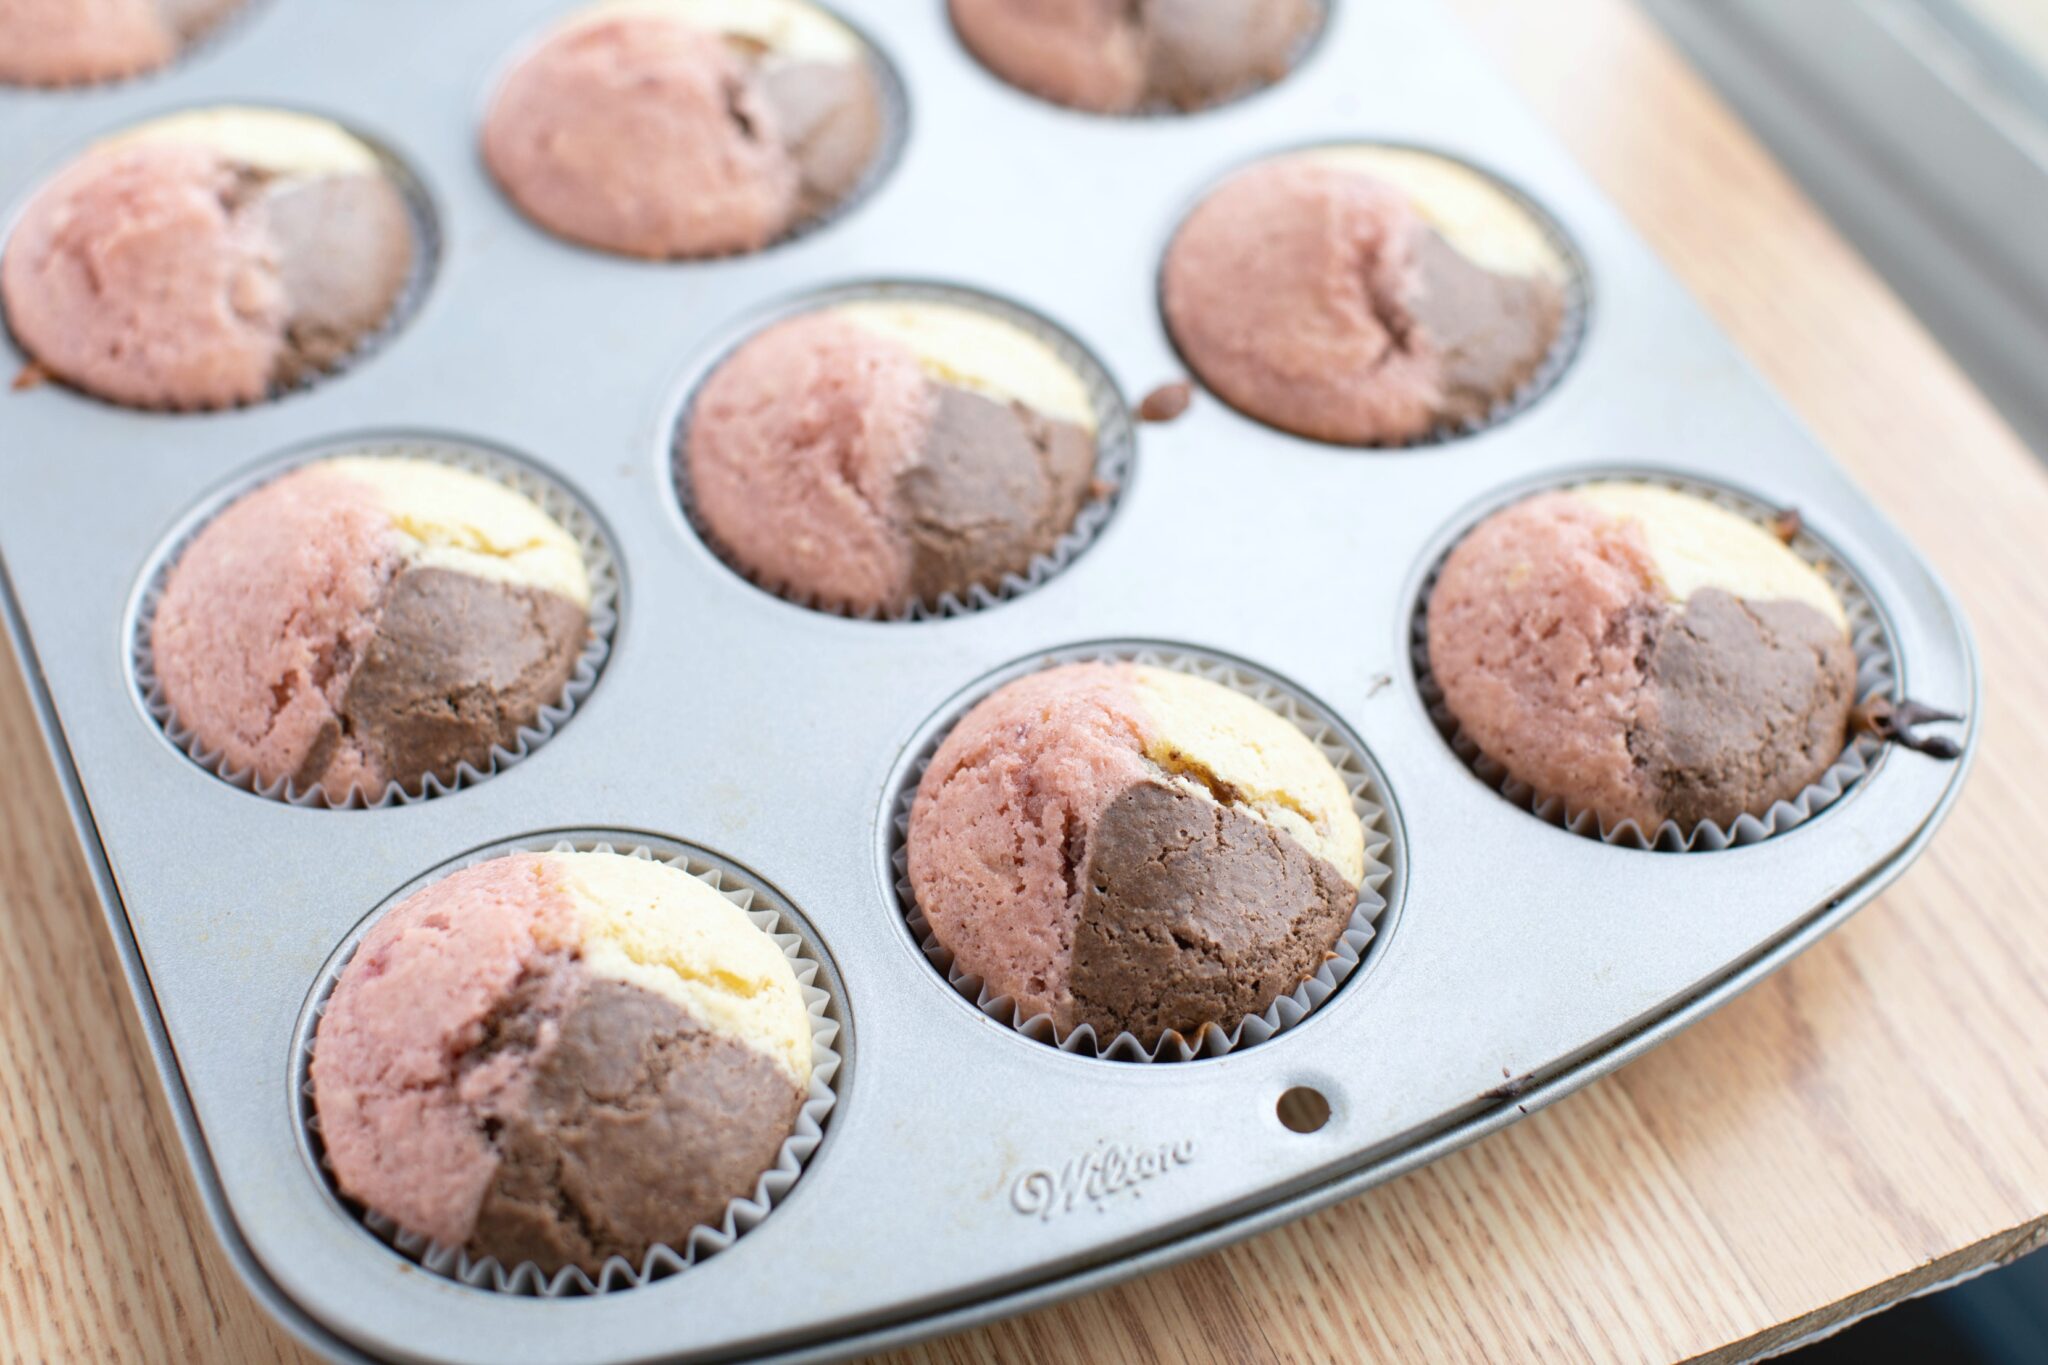 A muffin tray straight out of the oven filled with Neapolitan Ice Cream muffins.